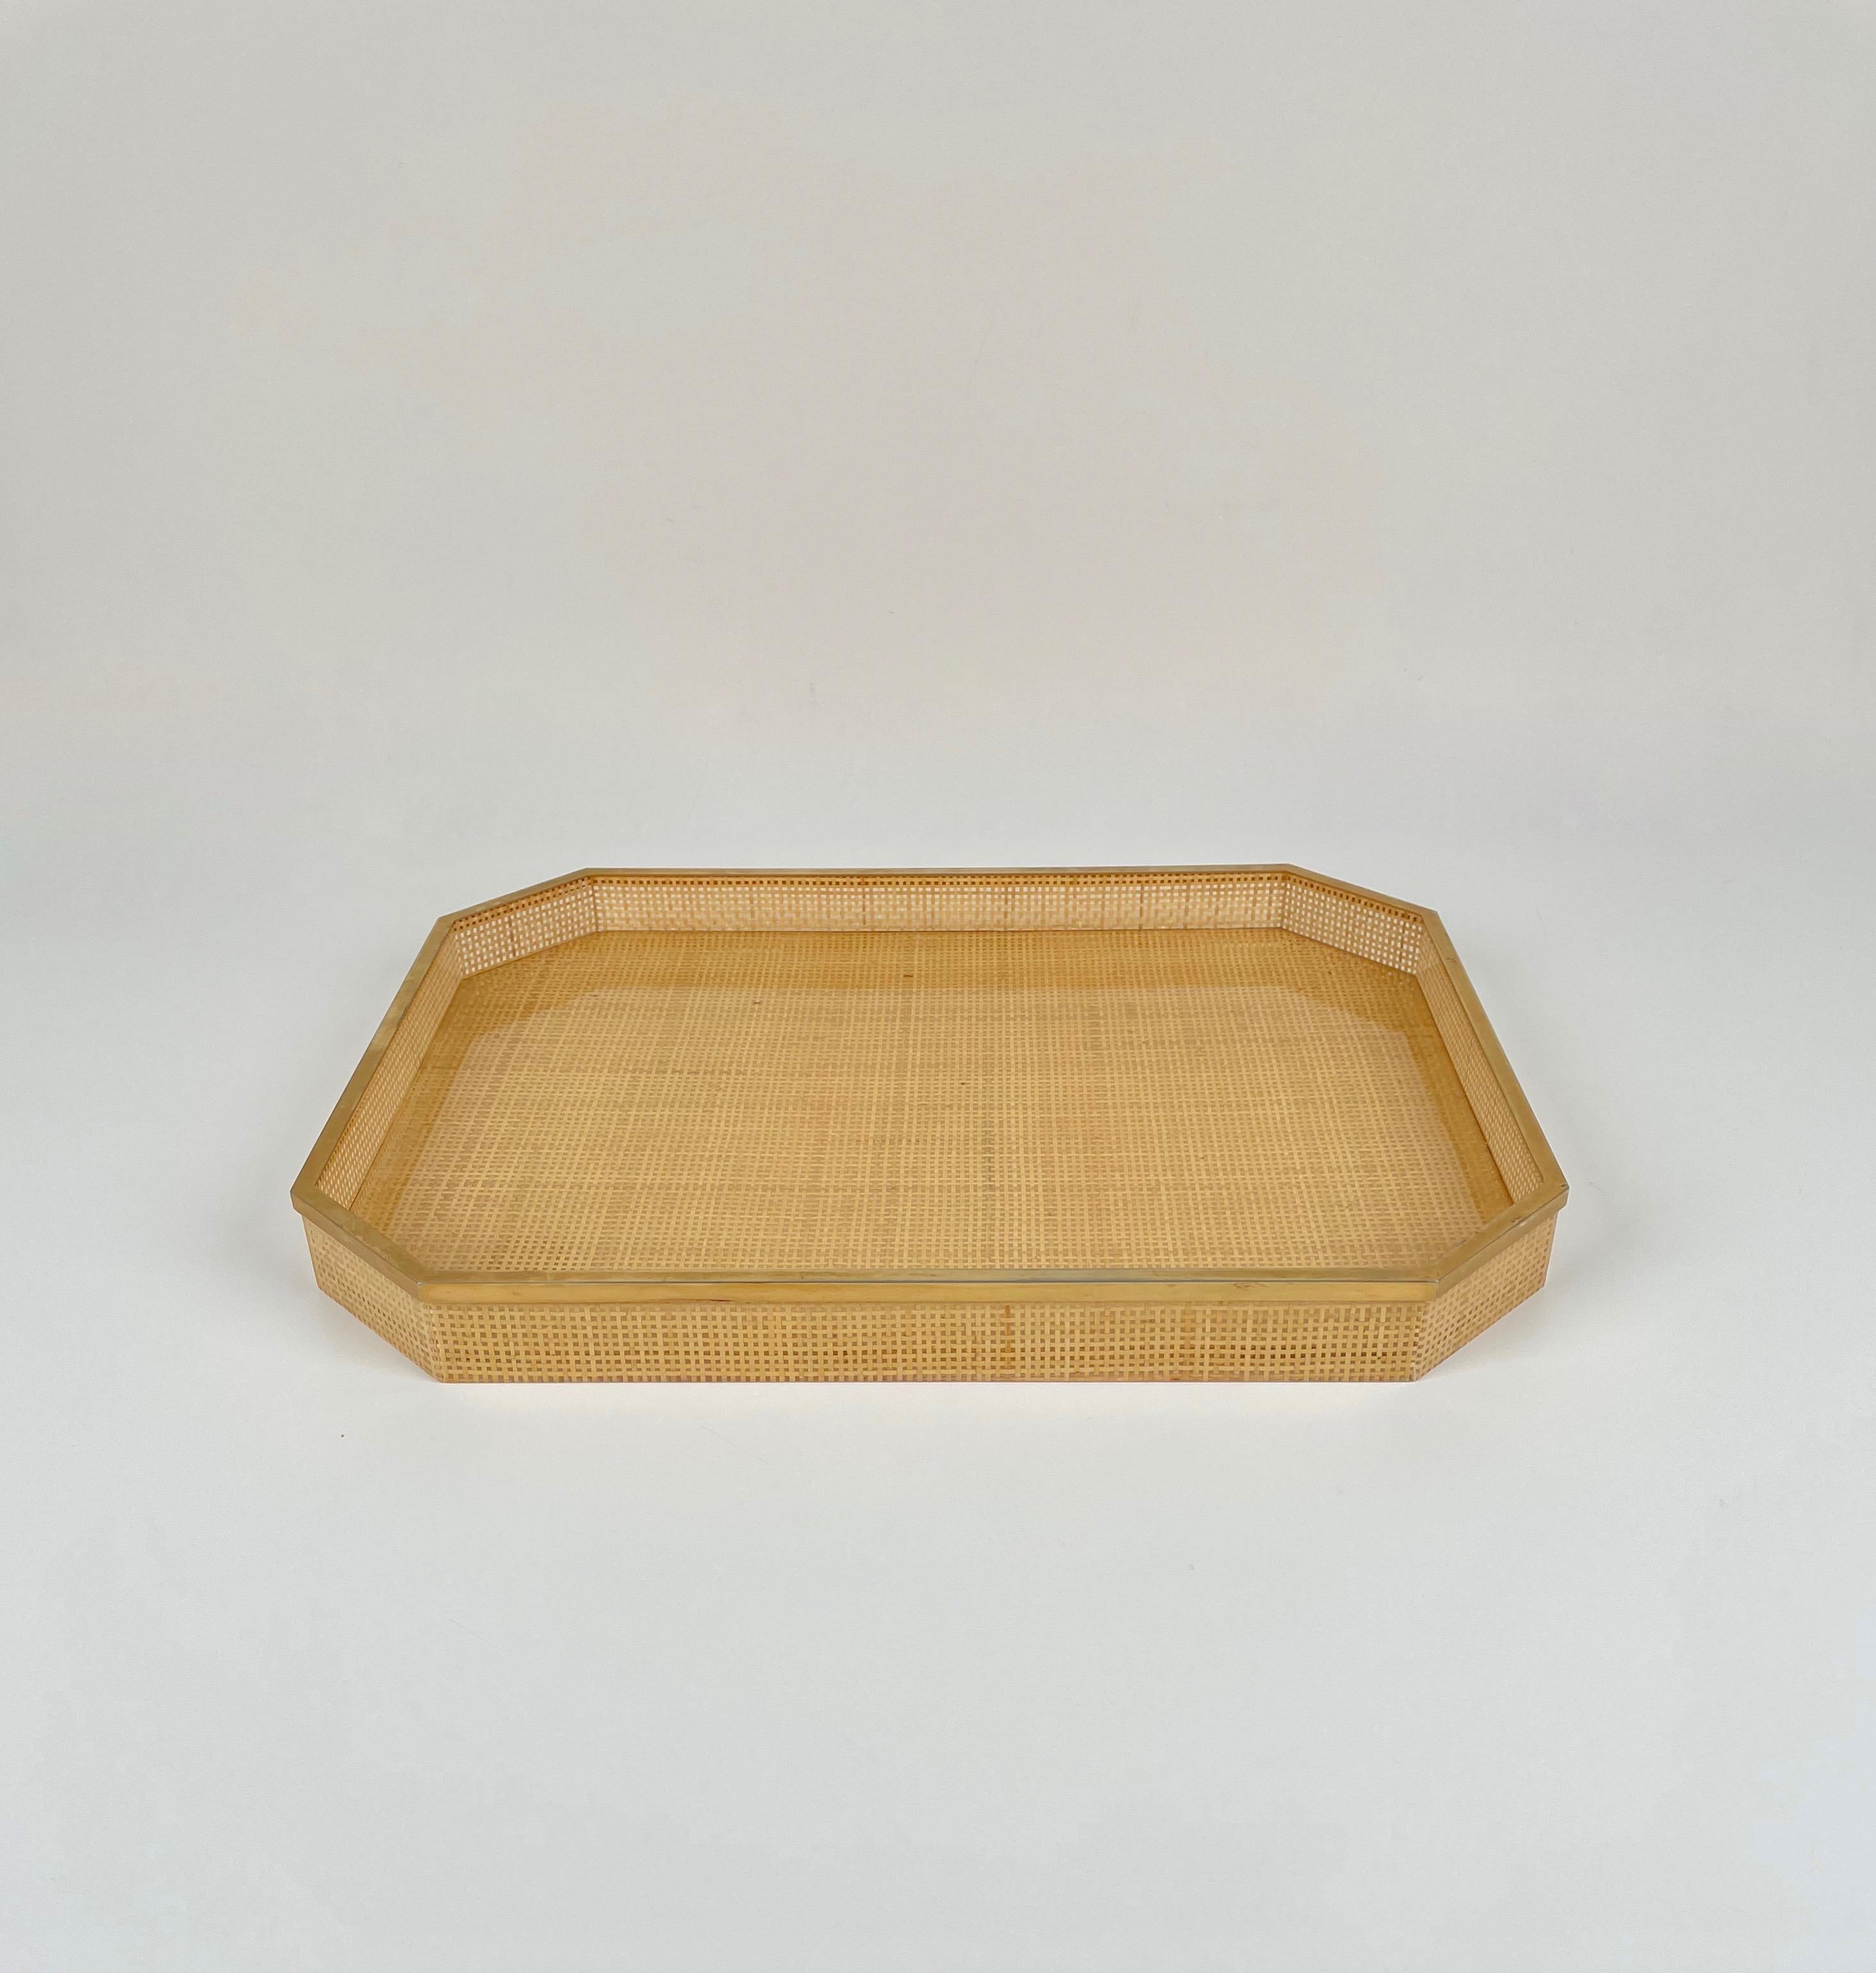 Centerpiece / serving tray by Janetti in Lucite and wicker featuring brass borders, 1960s.
On the bottom, the label of the shop in which it was first purchased can be still seen: 